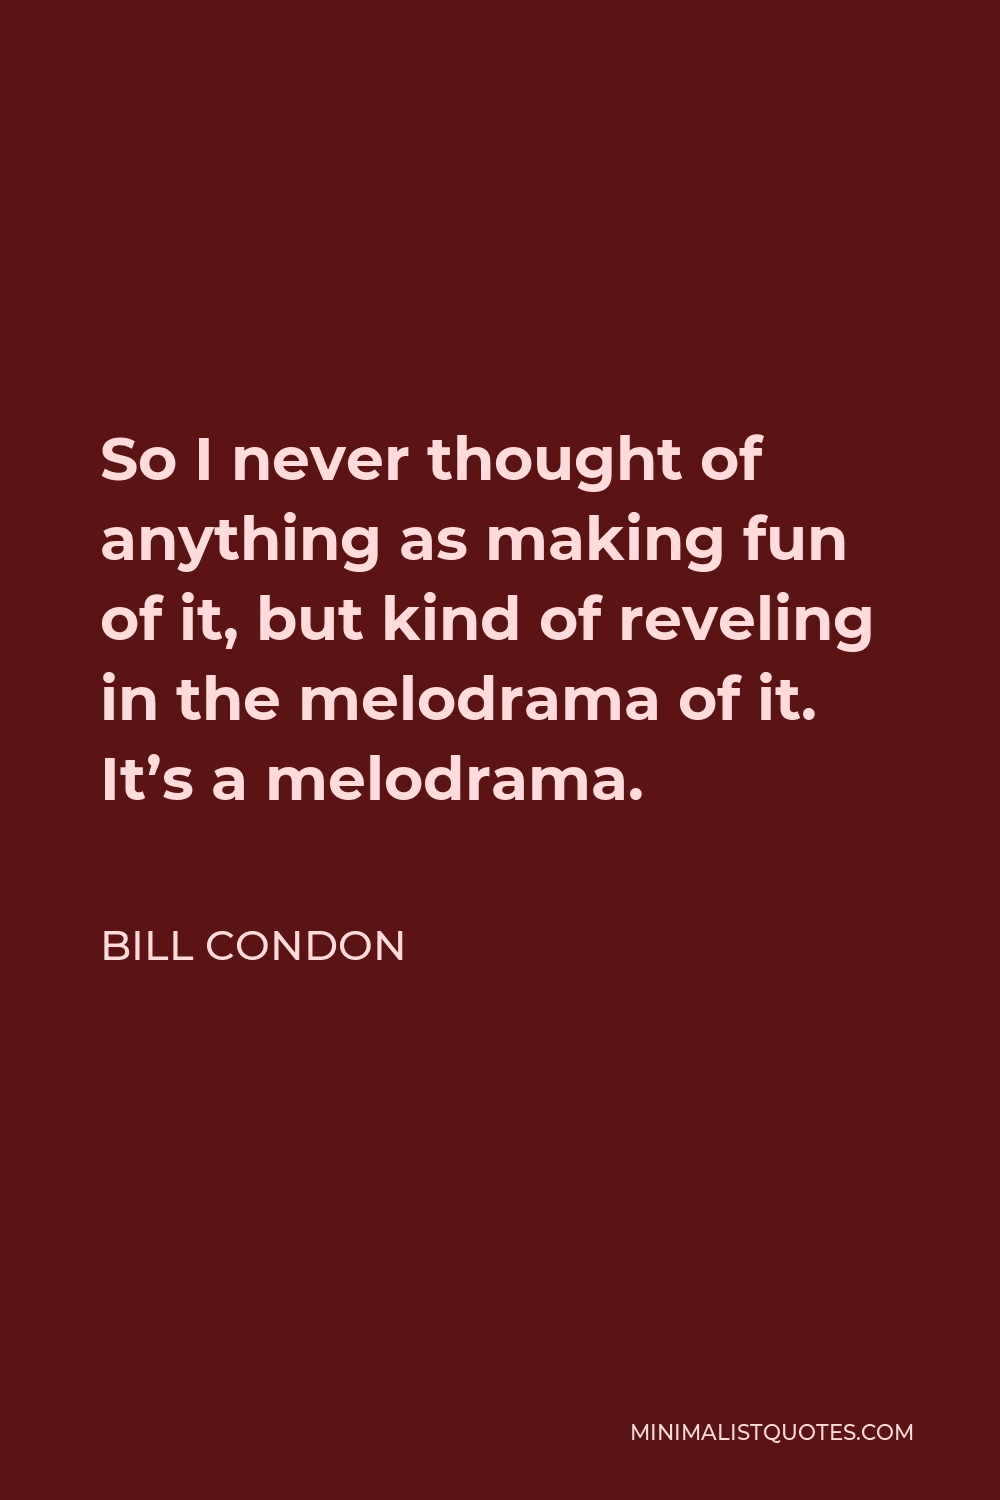 Bill Condon Quote - So I never thought of anything as making fun of it, but kind of reveling in the melodrama of it. It’s a melodrama.